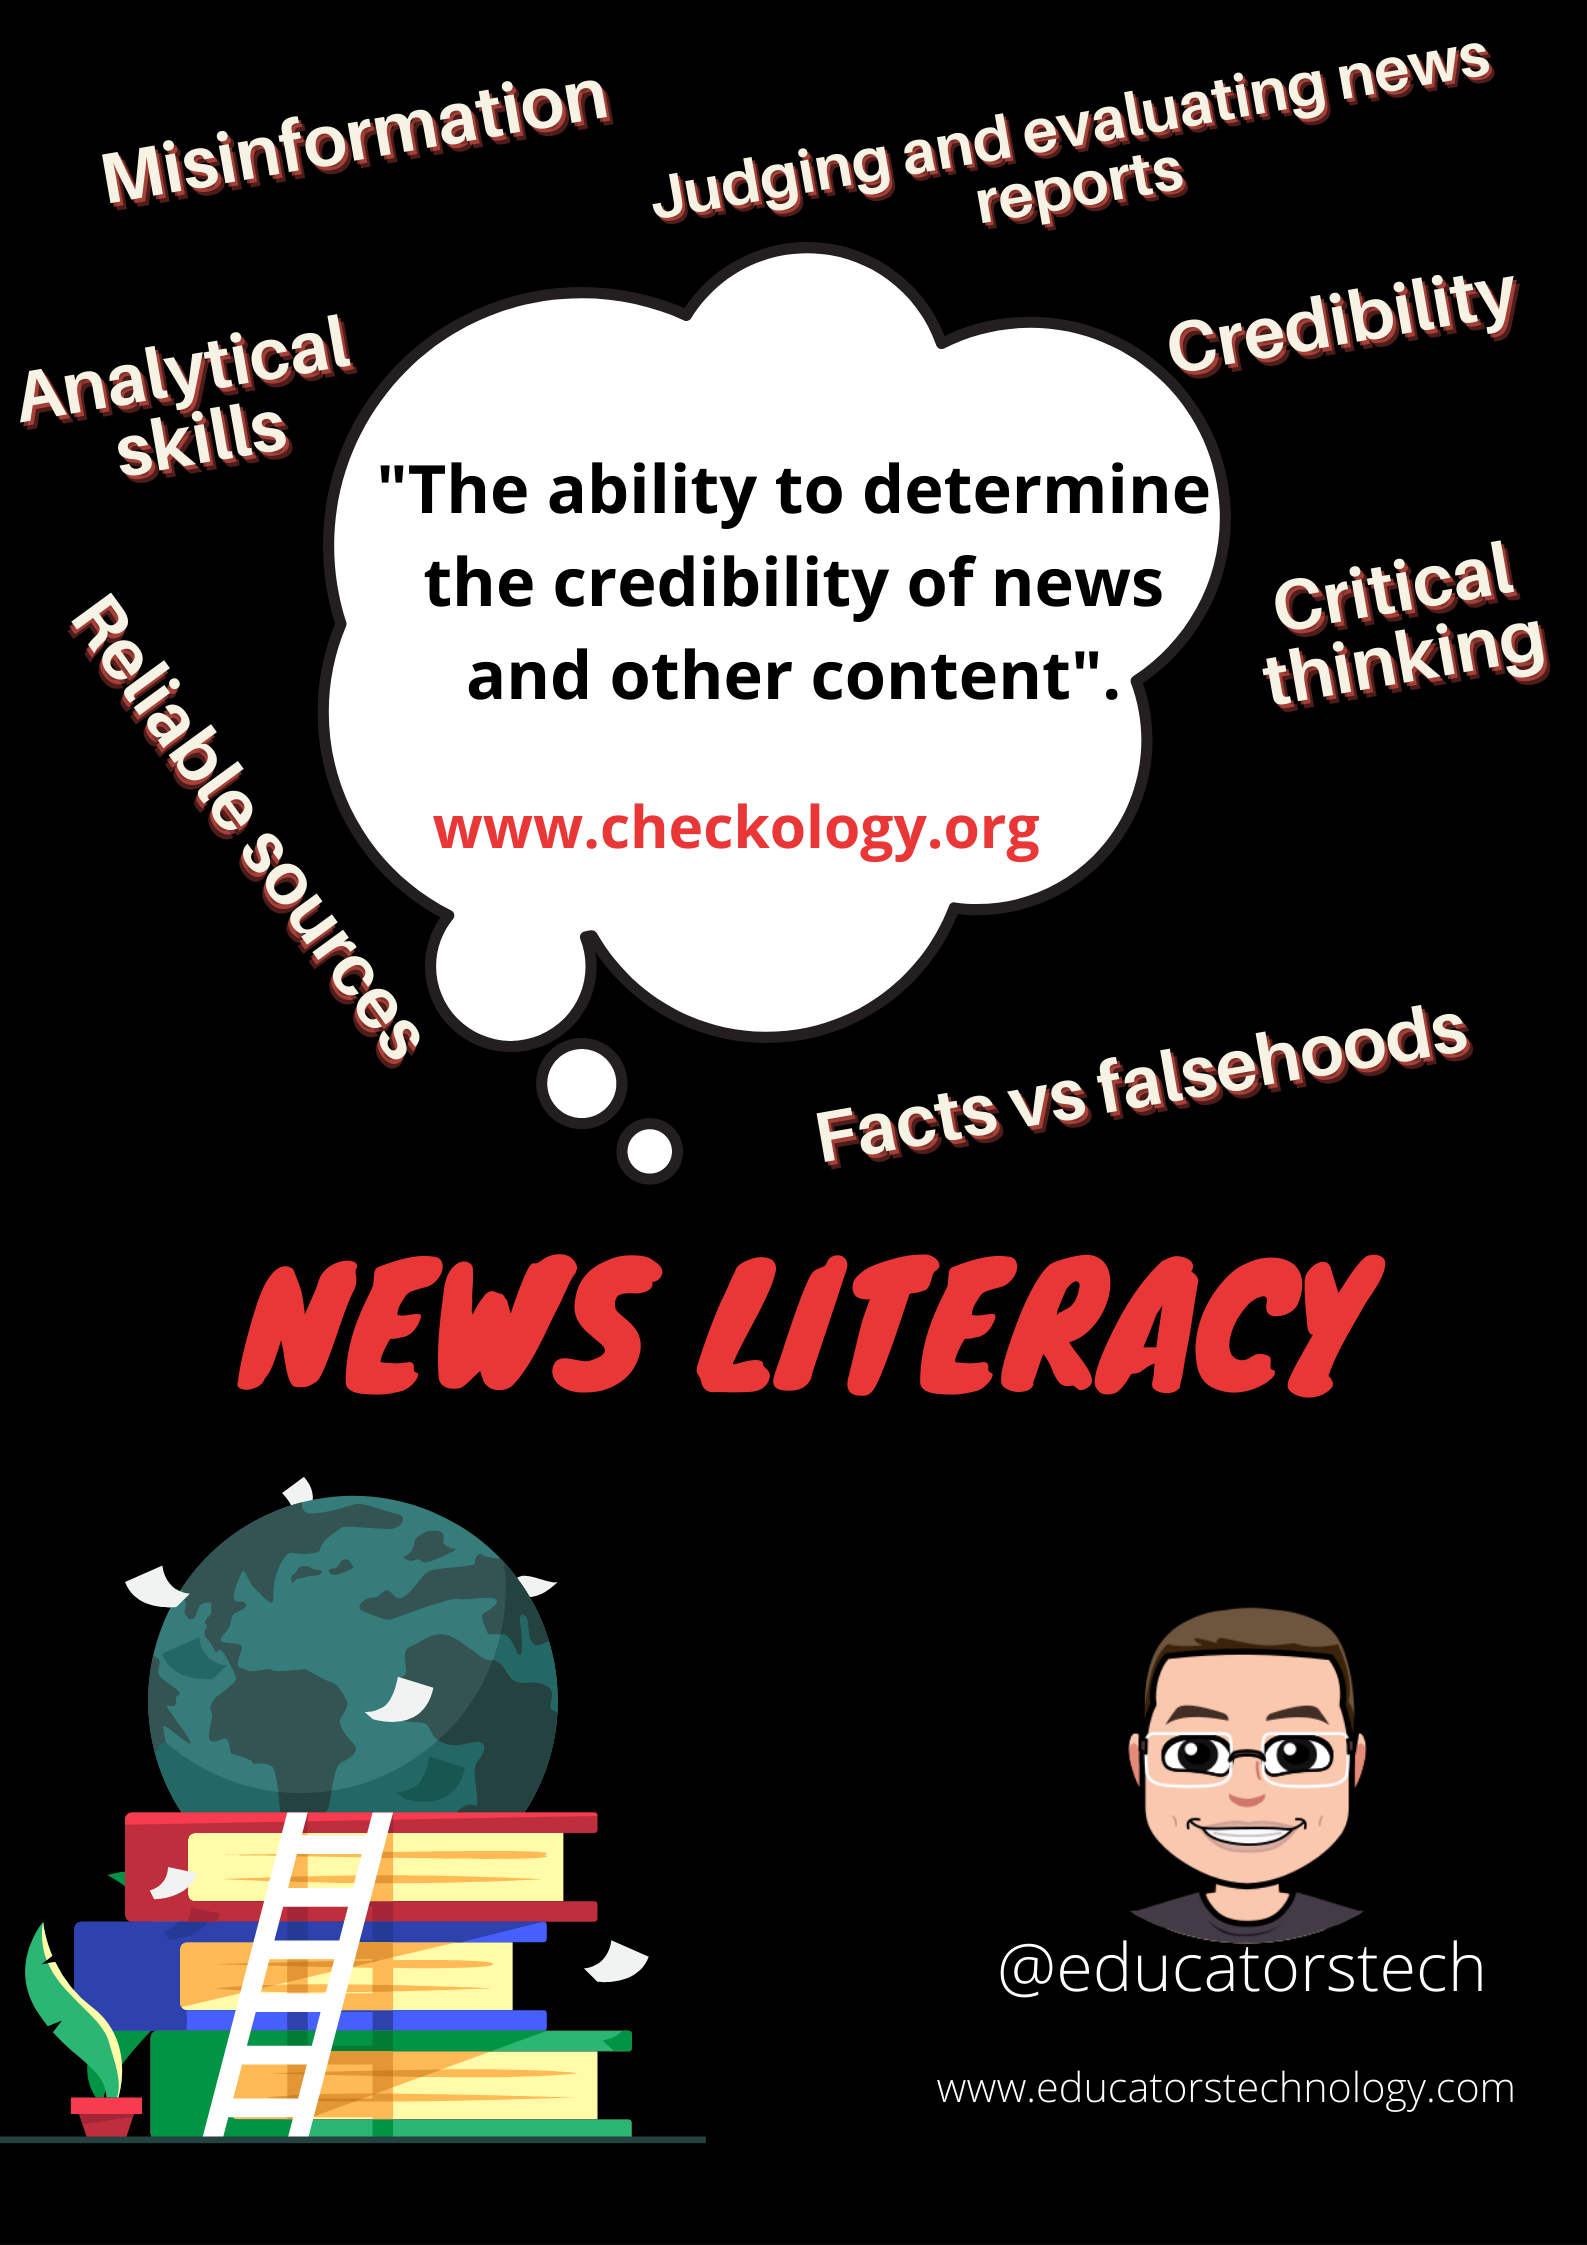 Checkology Provides Educational Resources to Help Students Become News Literate